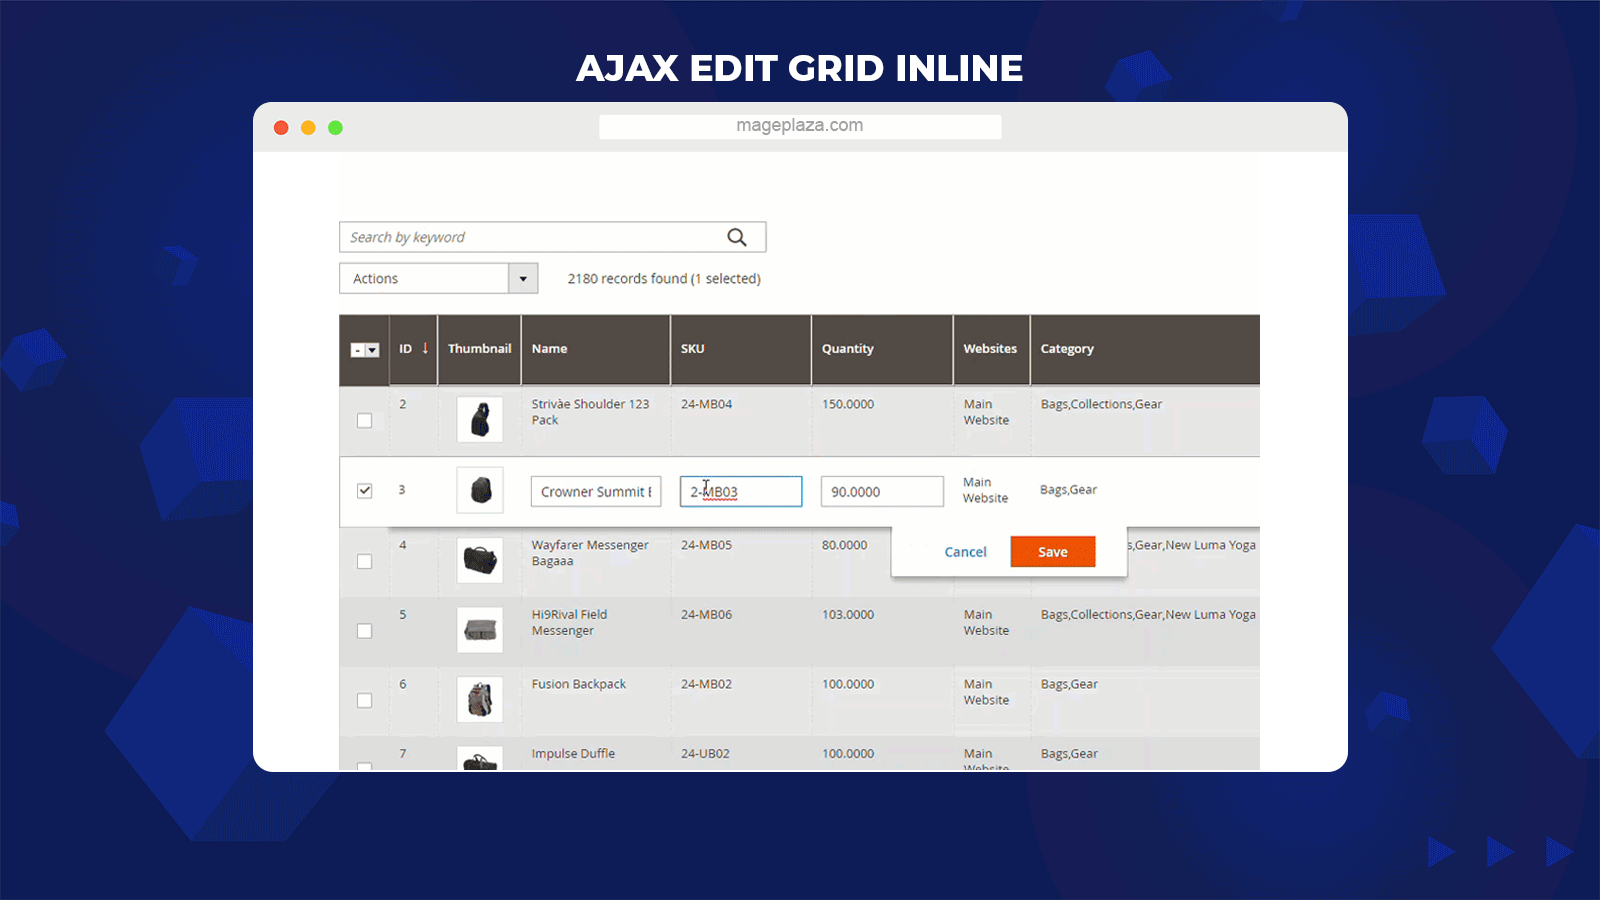 Magento 2 product grid extension